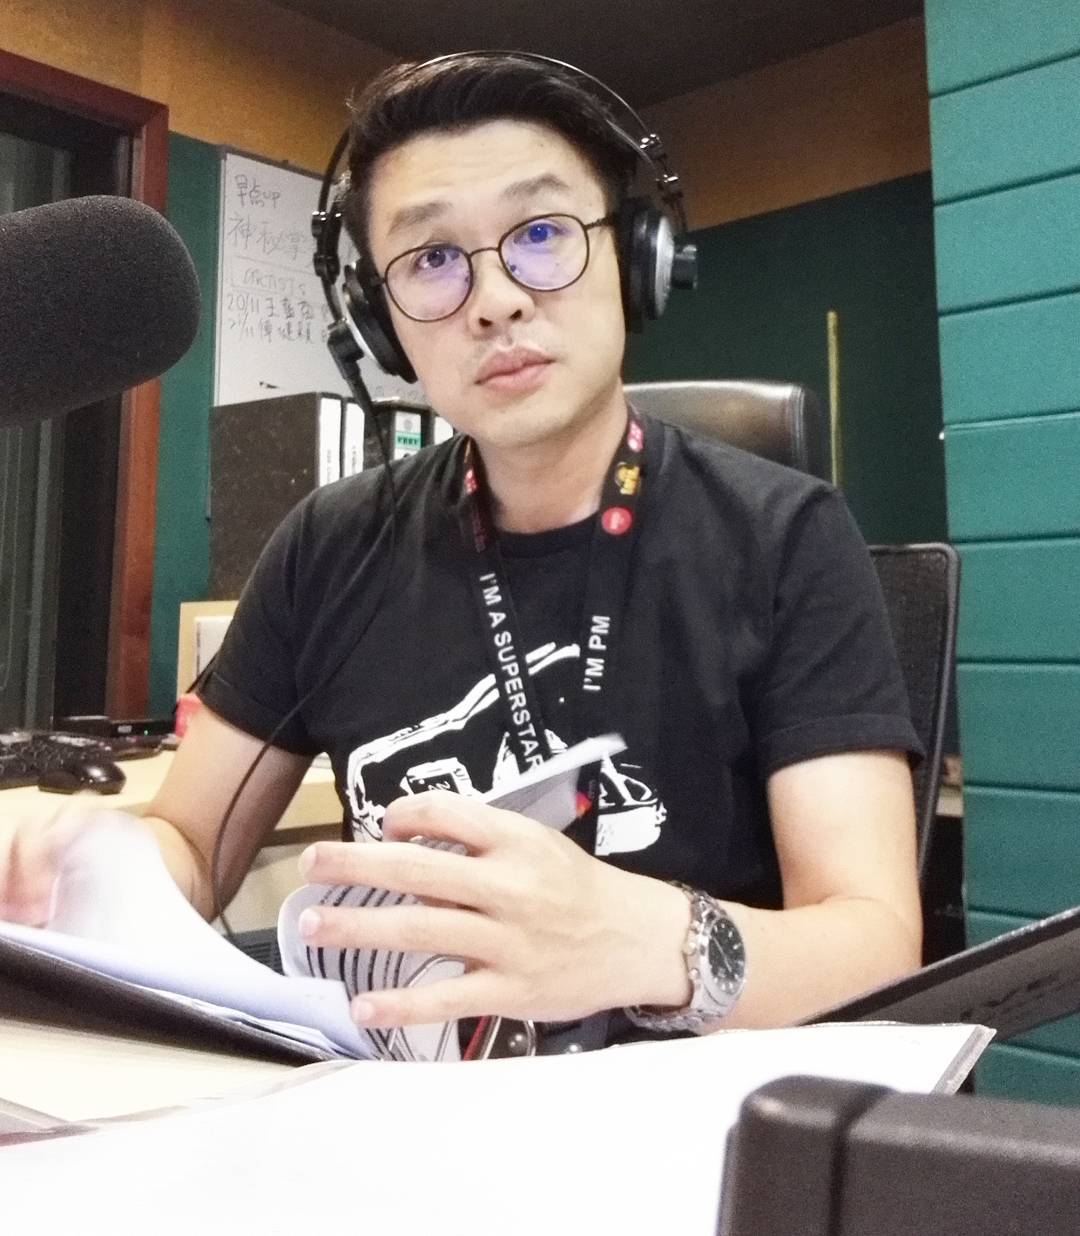 Being a dj, author, and mc: pm wang shares insights of a multi-career life